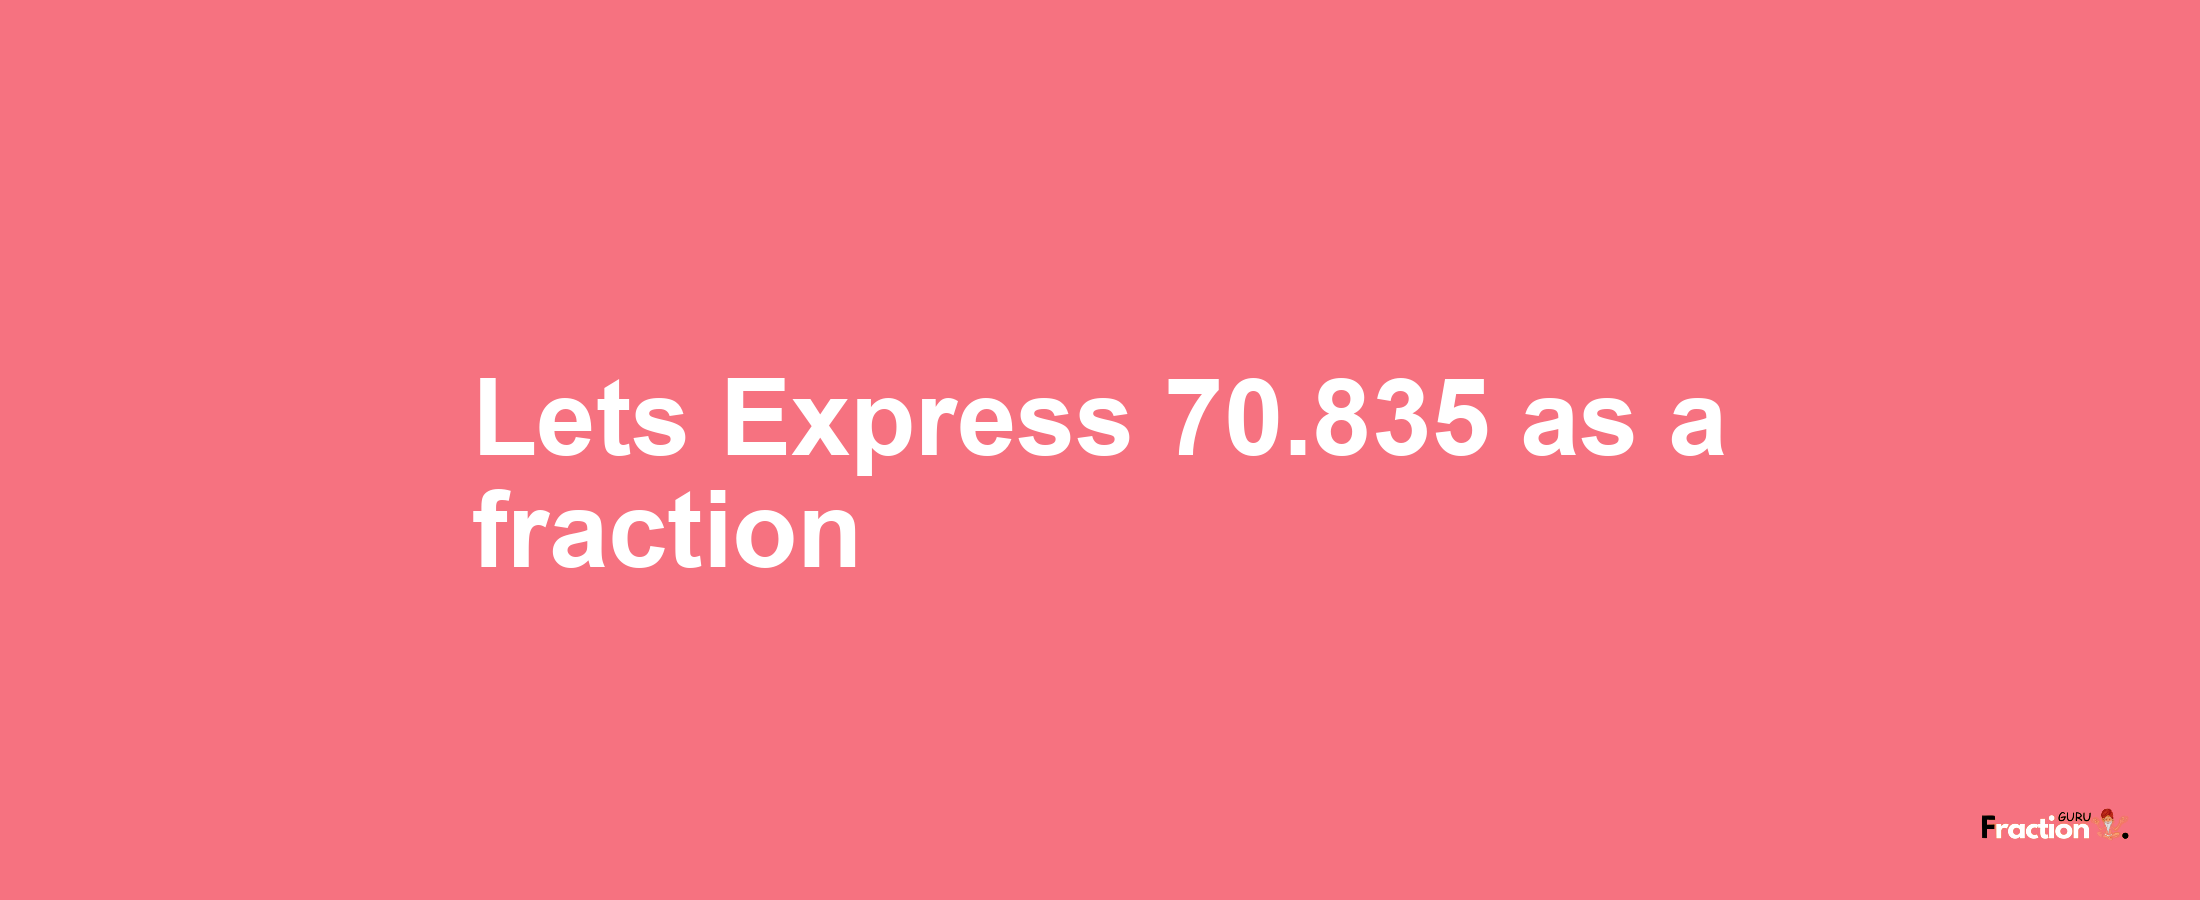 Lets Express 70.835 as afraction